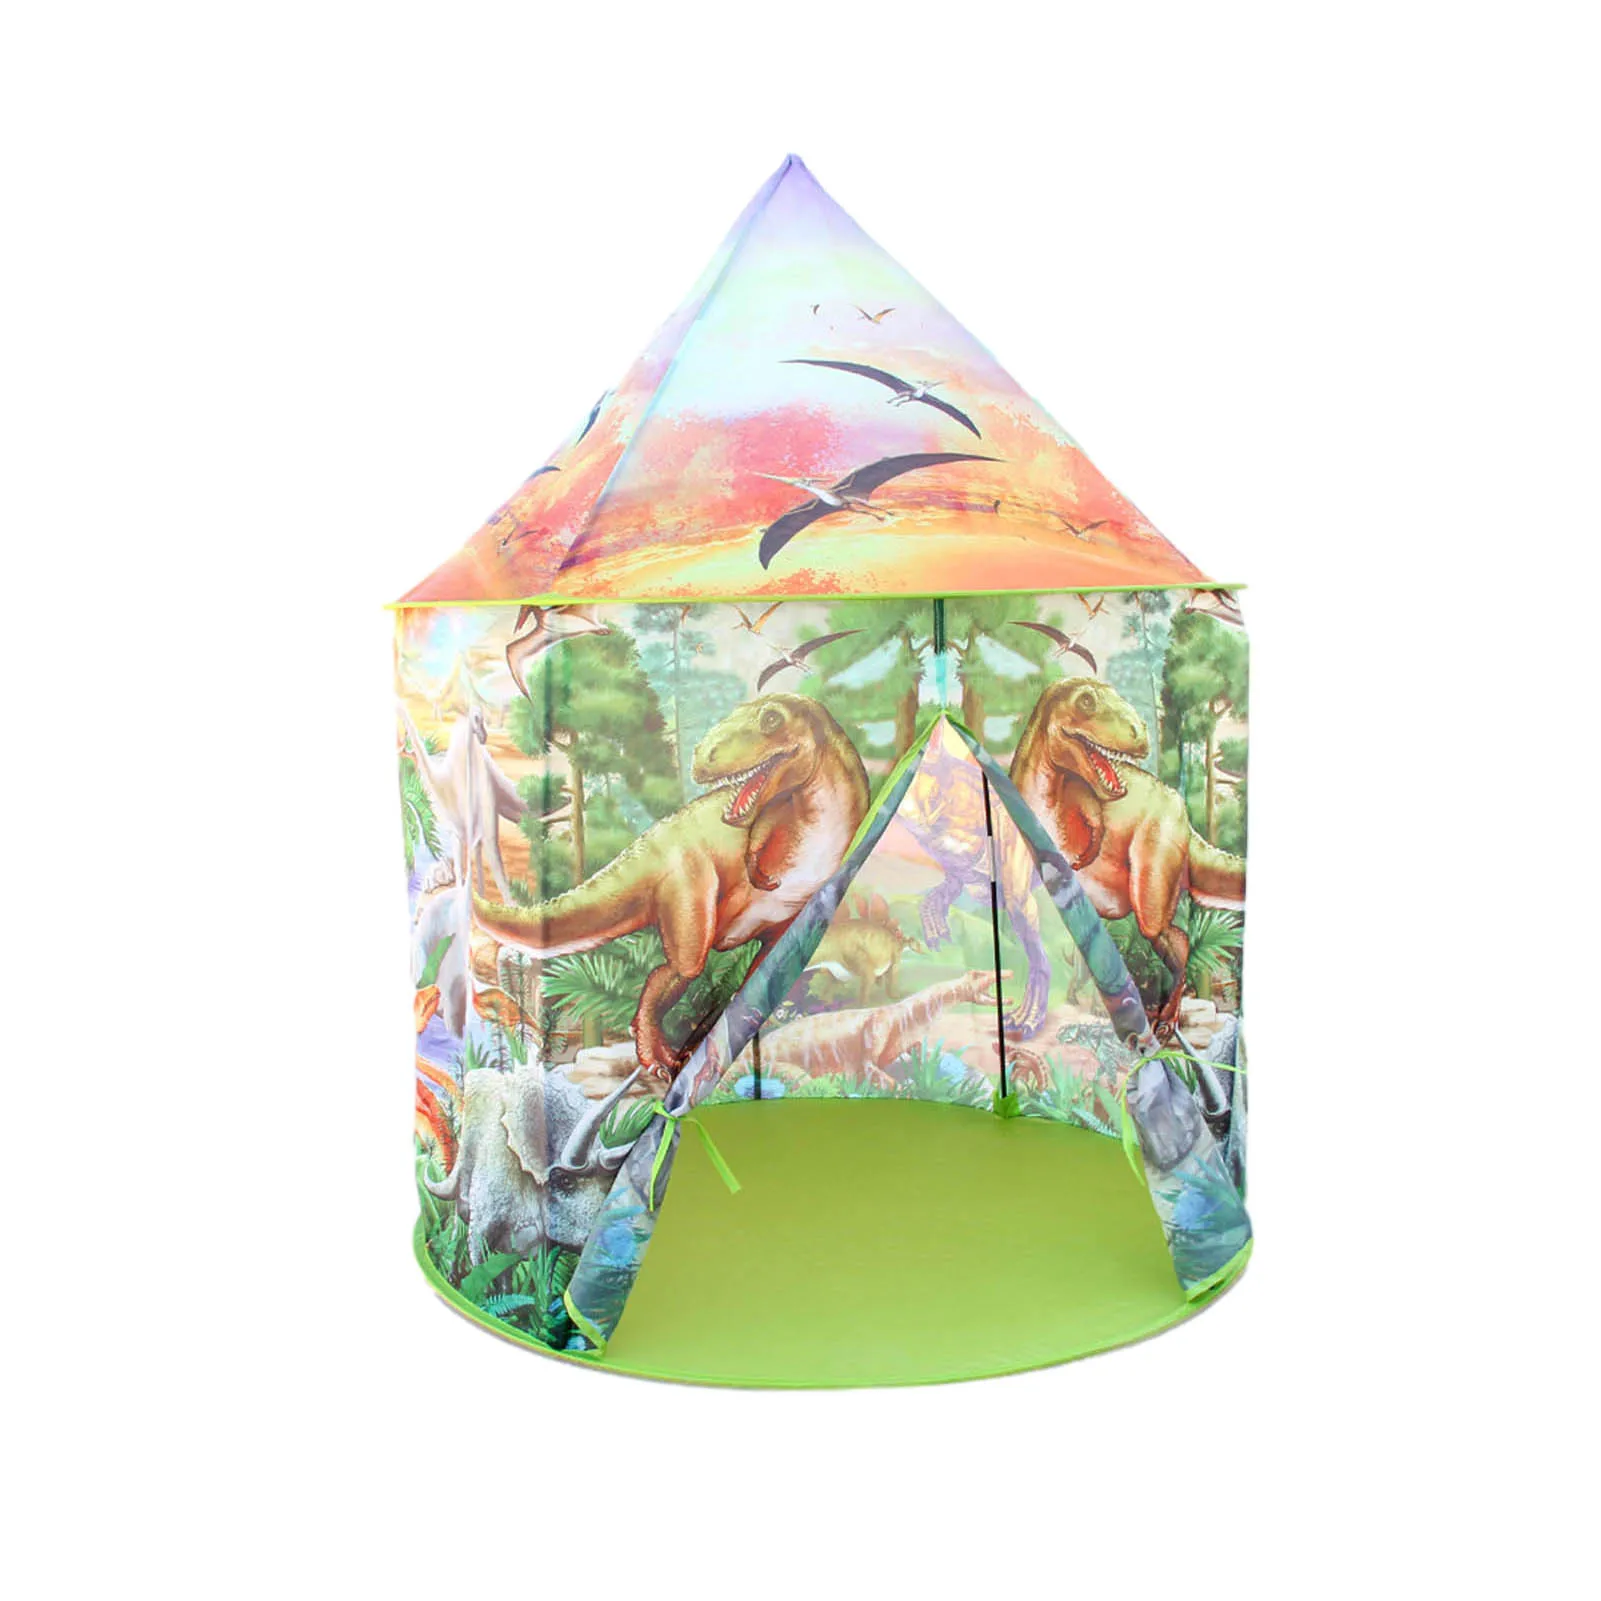 

Dinosaur Kids Play Toys Tent For Children's House Tipi Tents Folding Indoor Garden Playhouse Child Ball Pool Elegantly